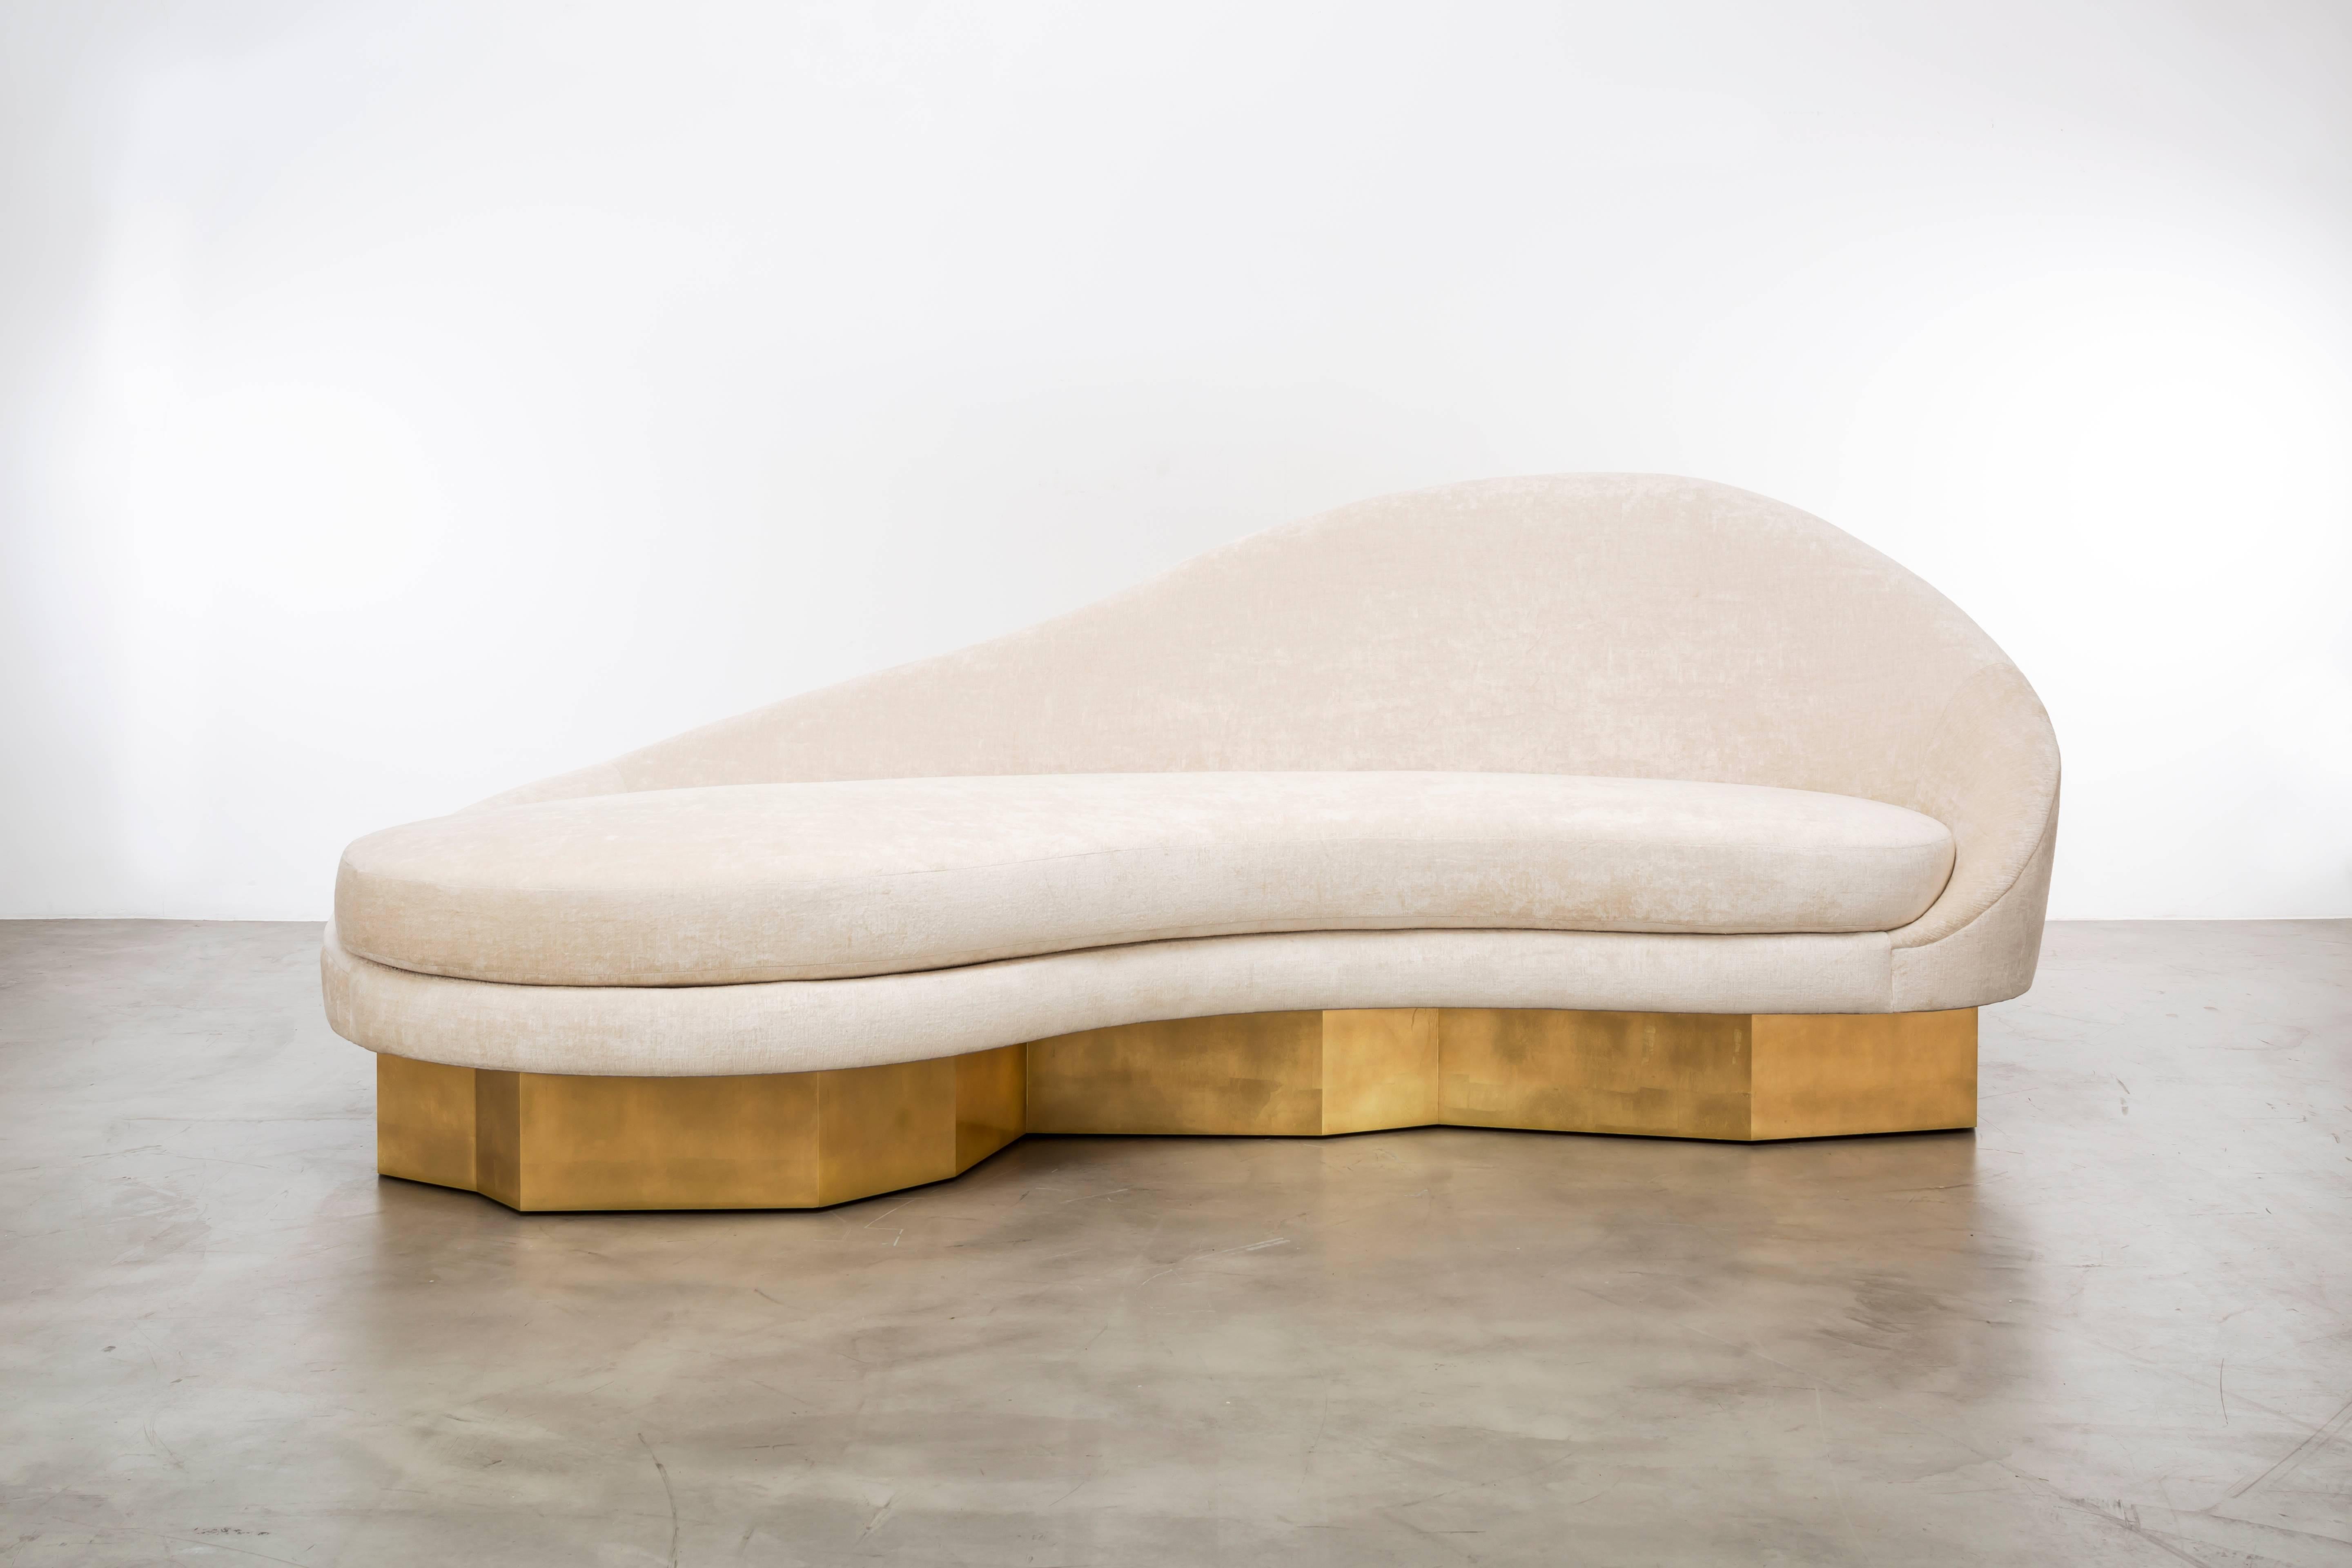 The Satine sofa, inspired by the curvature of Gaudi architecture, features an asymmetrical sophisticated slope that meets a fractured gold leaf plinth base to make a minimal and elegant statement. COM in a custom size of 96